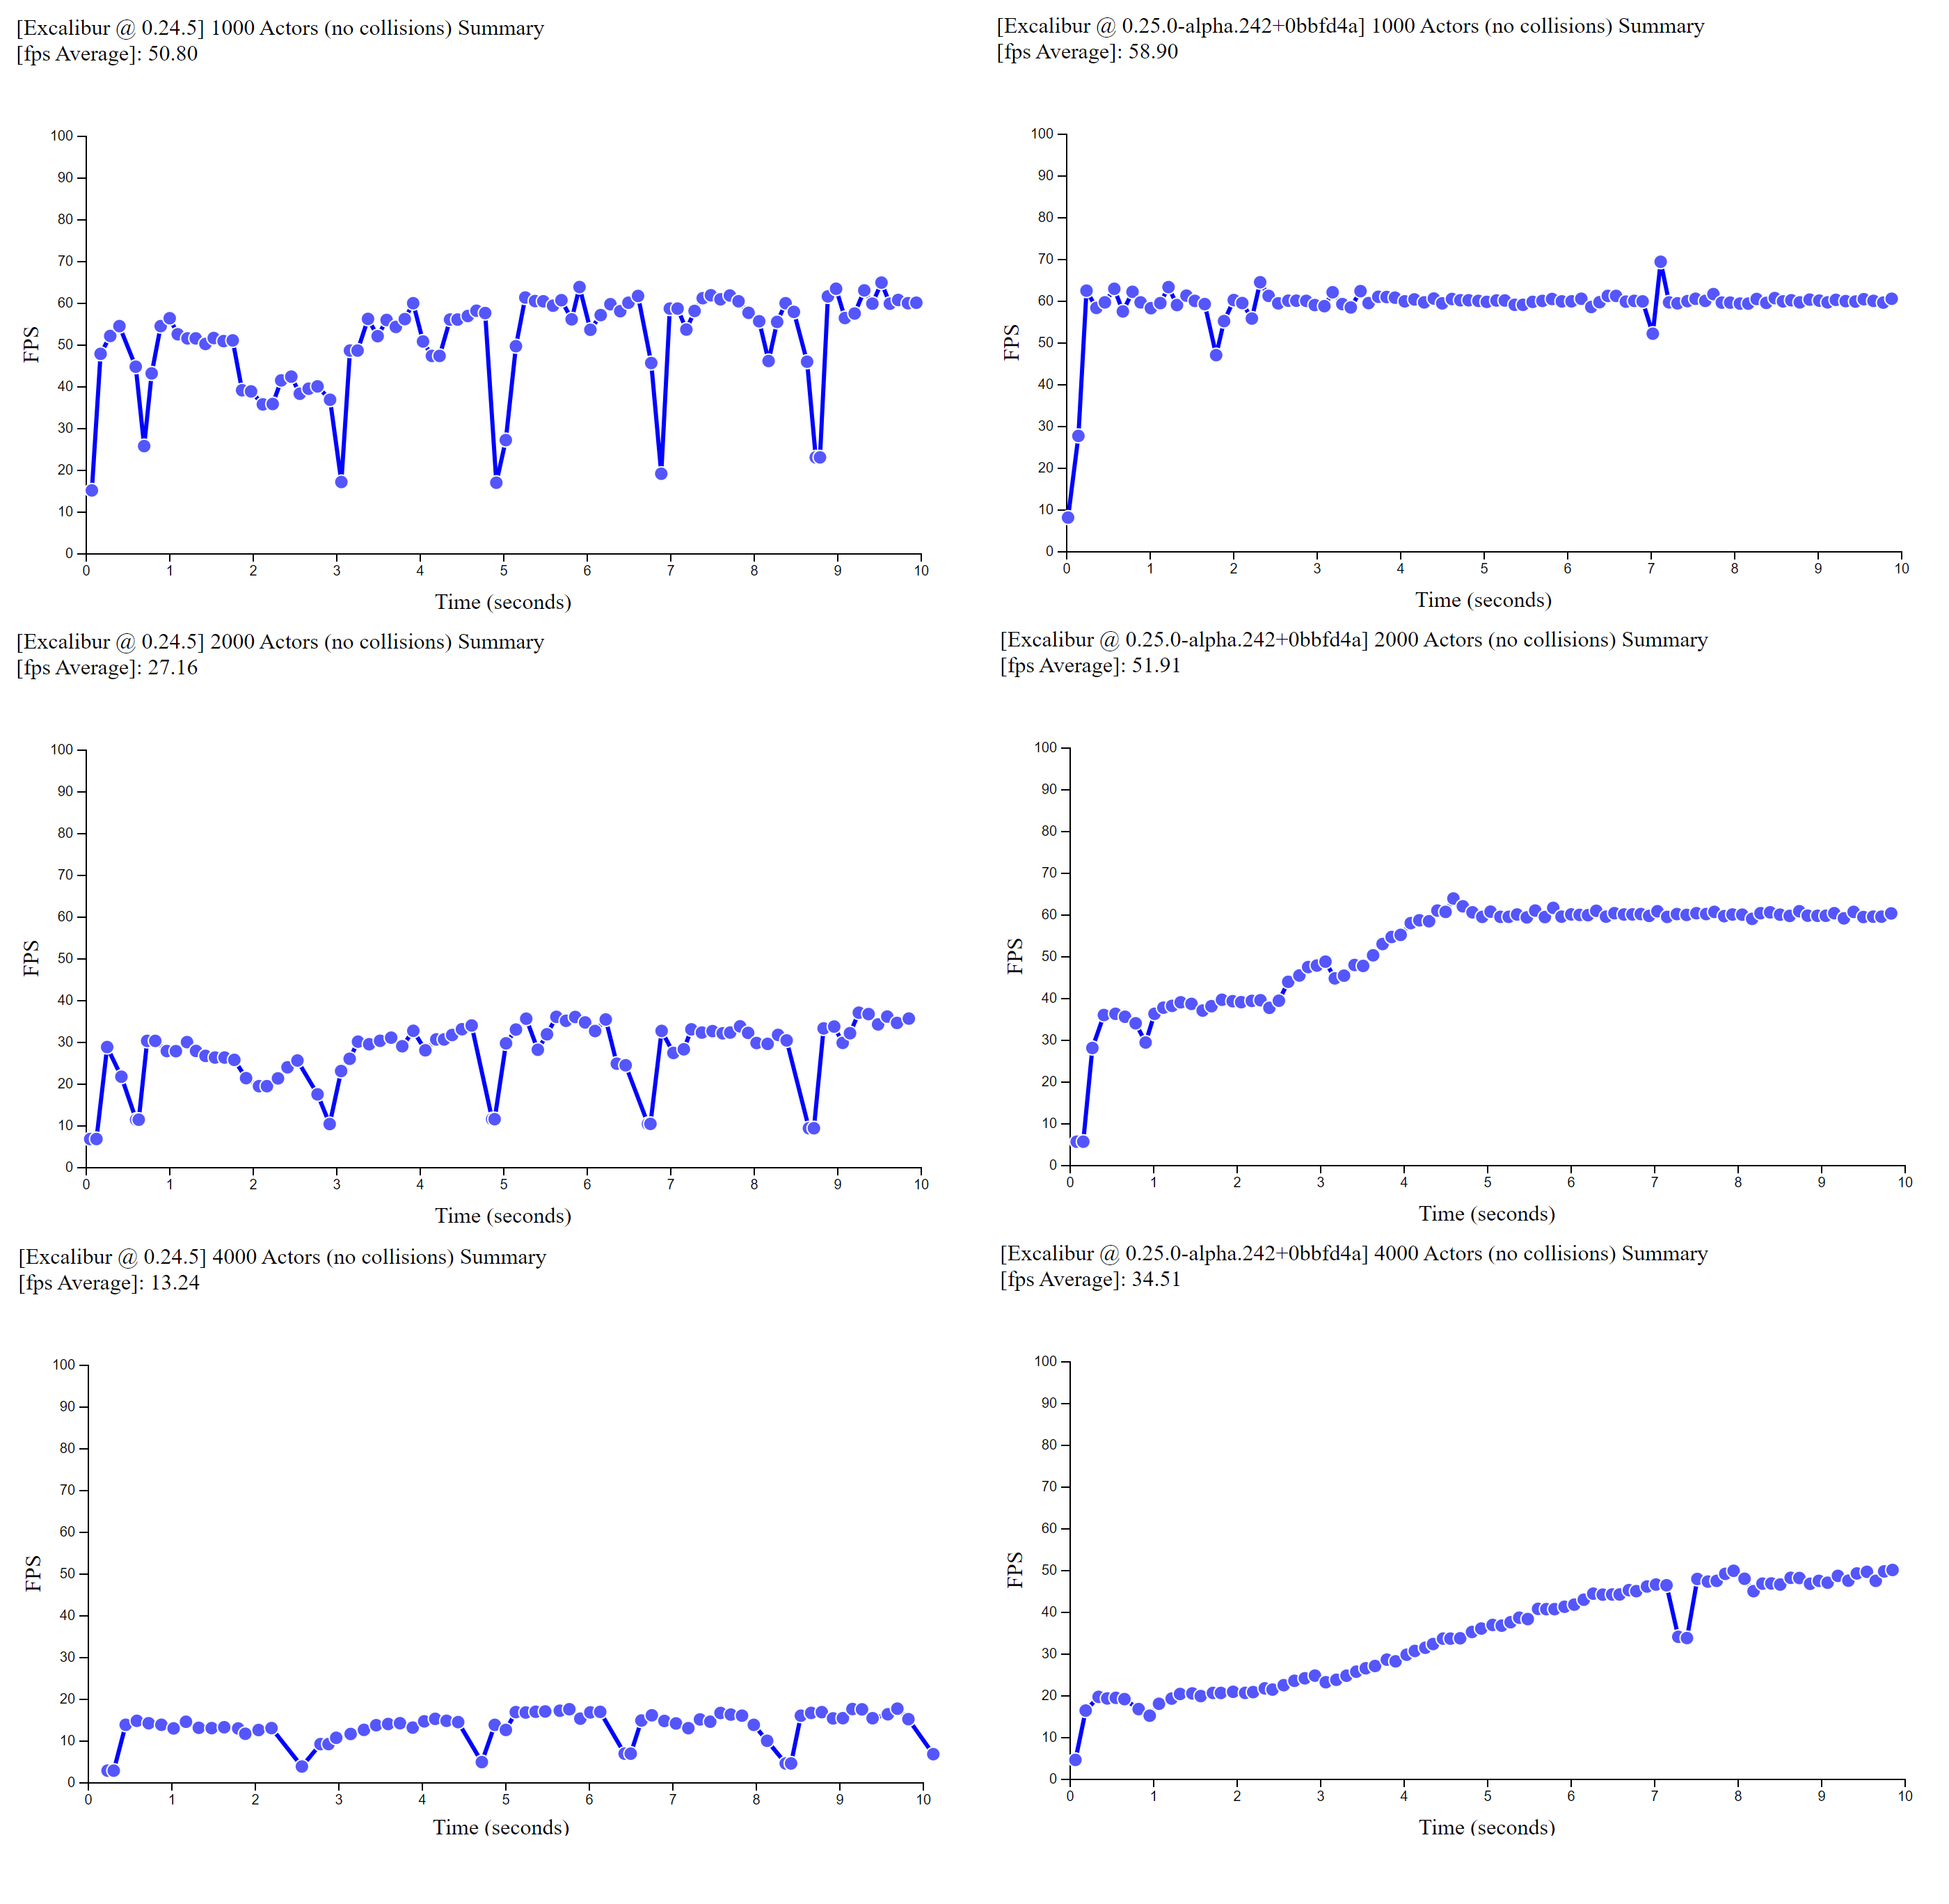 graphs showing an average improvement of 8 FPS for 1000 Actors, 24.75 FPS for 2000 Actors, and 21.27 FPS for 3000 Actors